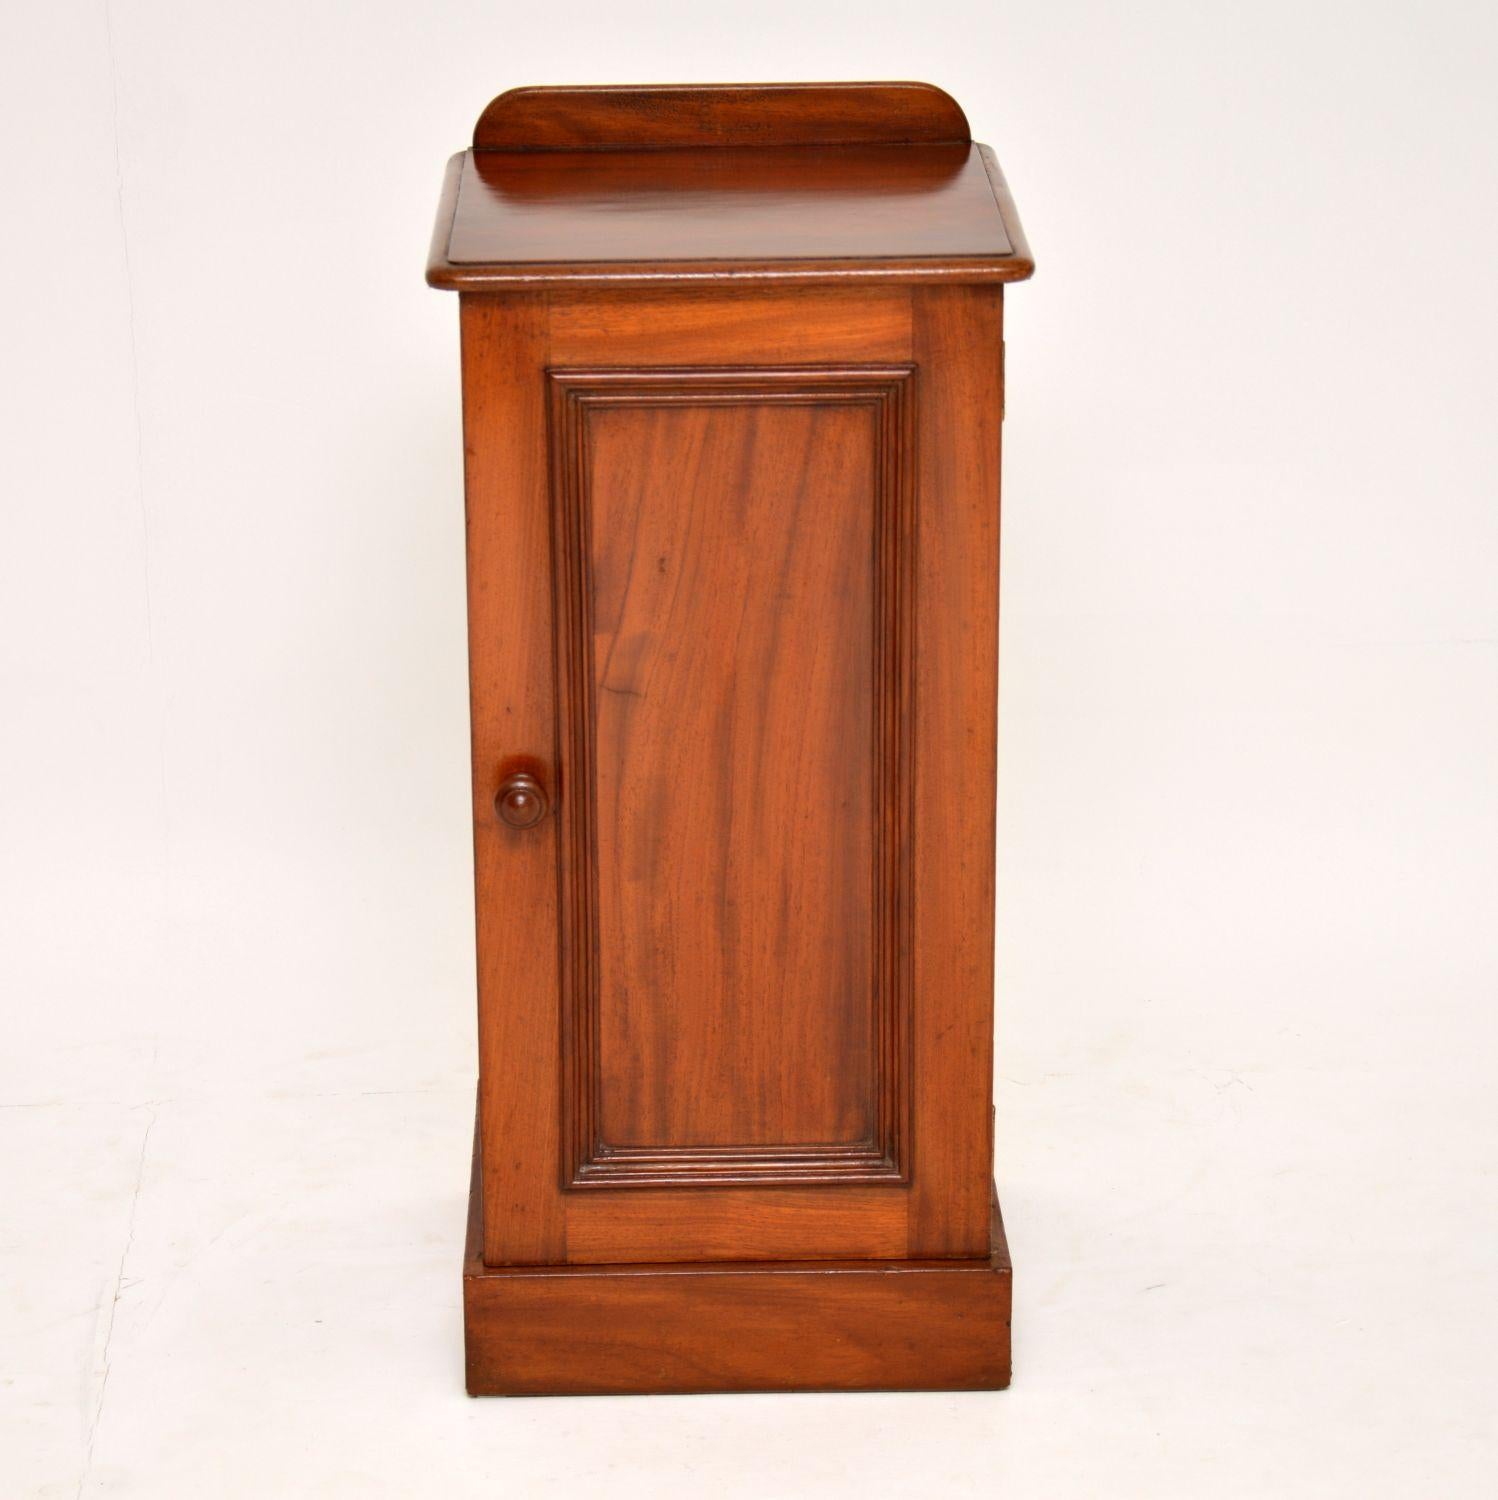 Antique Victorian mahogany bedside cabinet which could be used anywhere in the home. It’s in good original condition & is a very practicable piece of furniture. This cabinet has the original back gallery, a panelled door, plenty of storage and sits